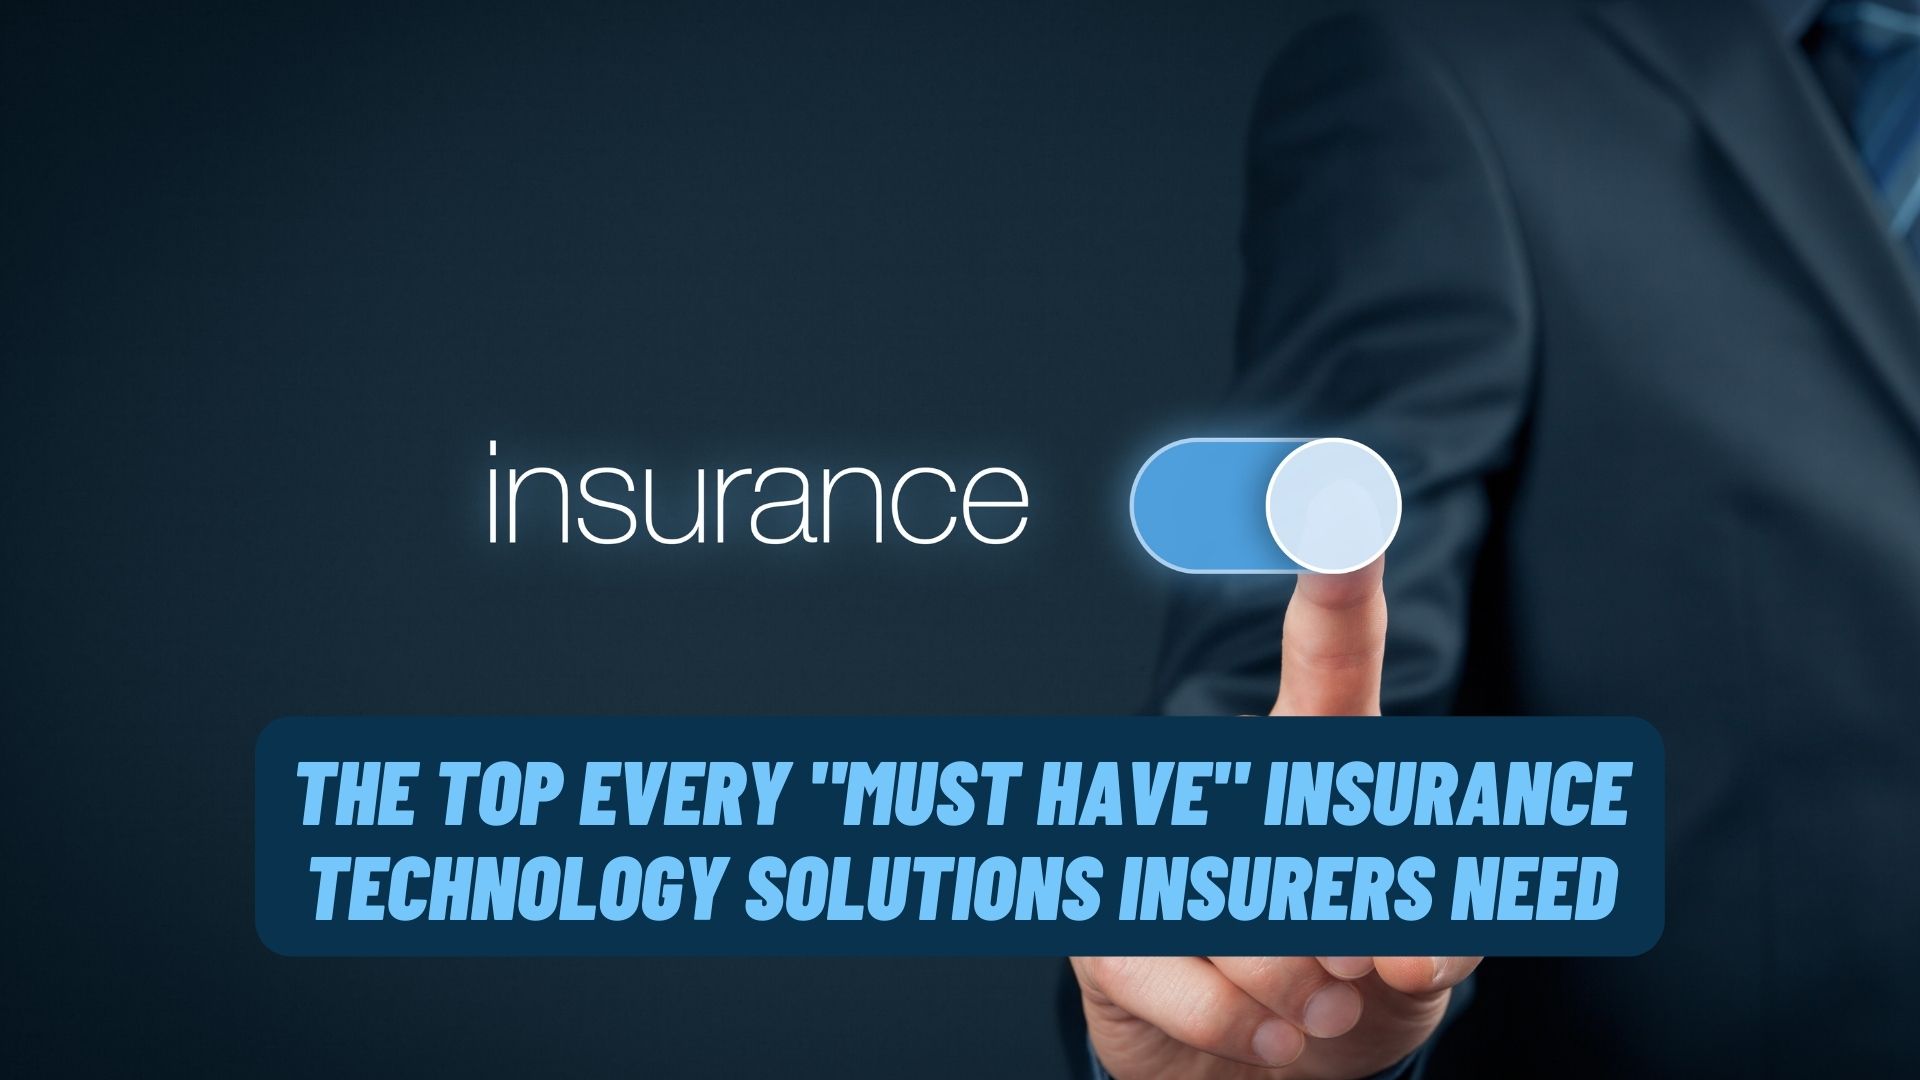 The Top Every "Must Have" Insurance Technology Solutions Insurers Need